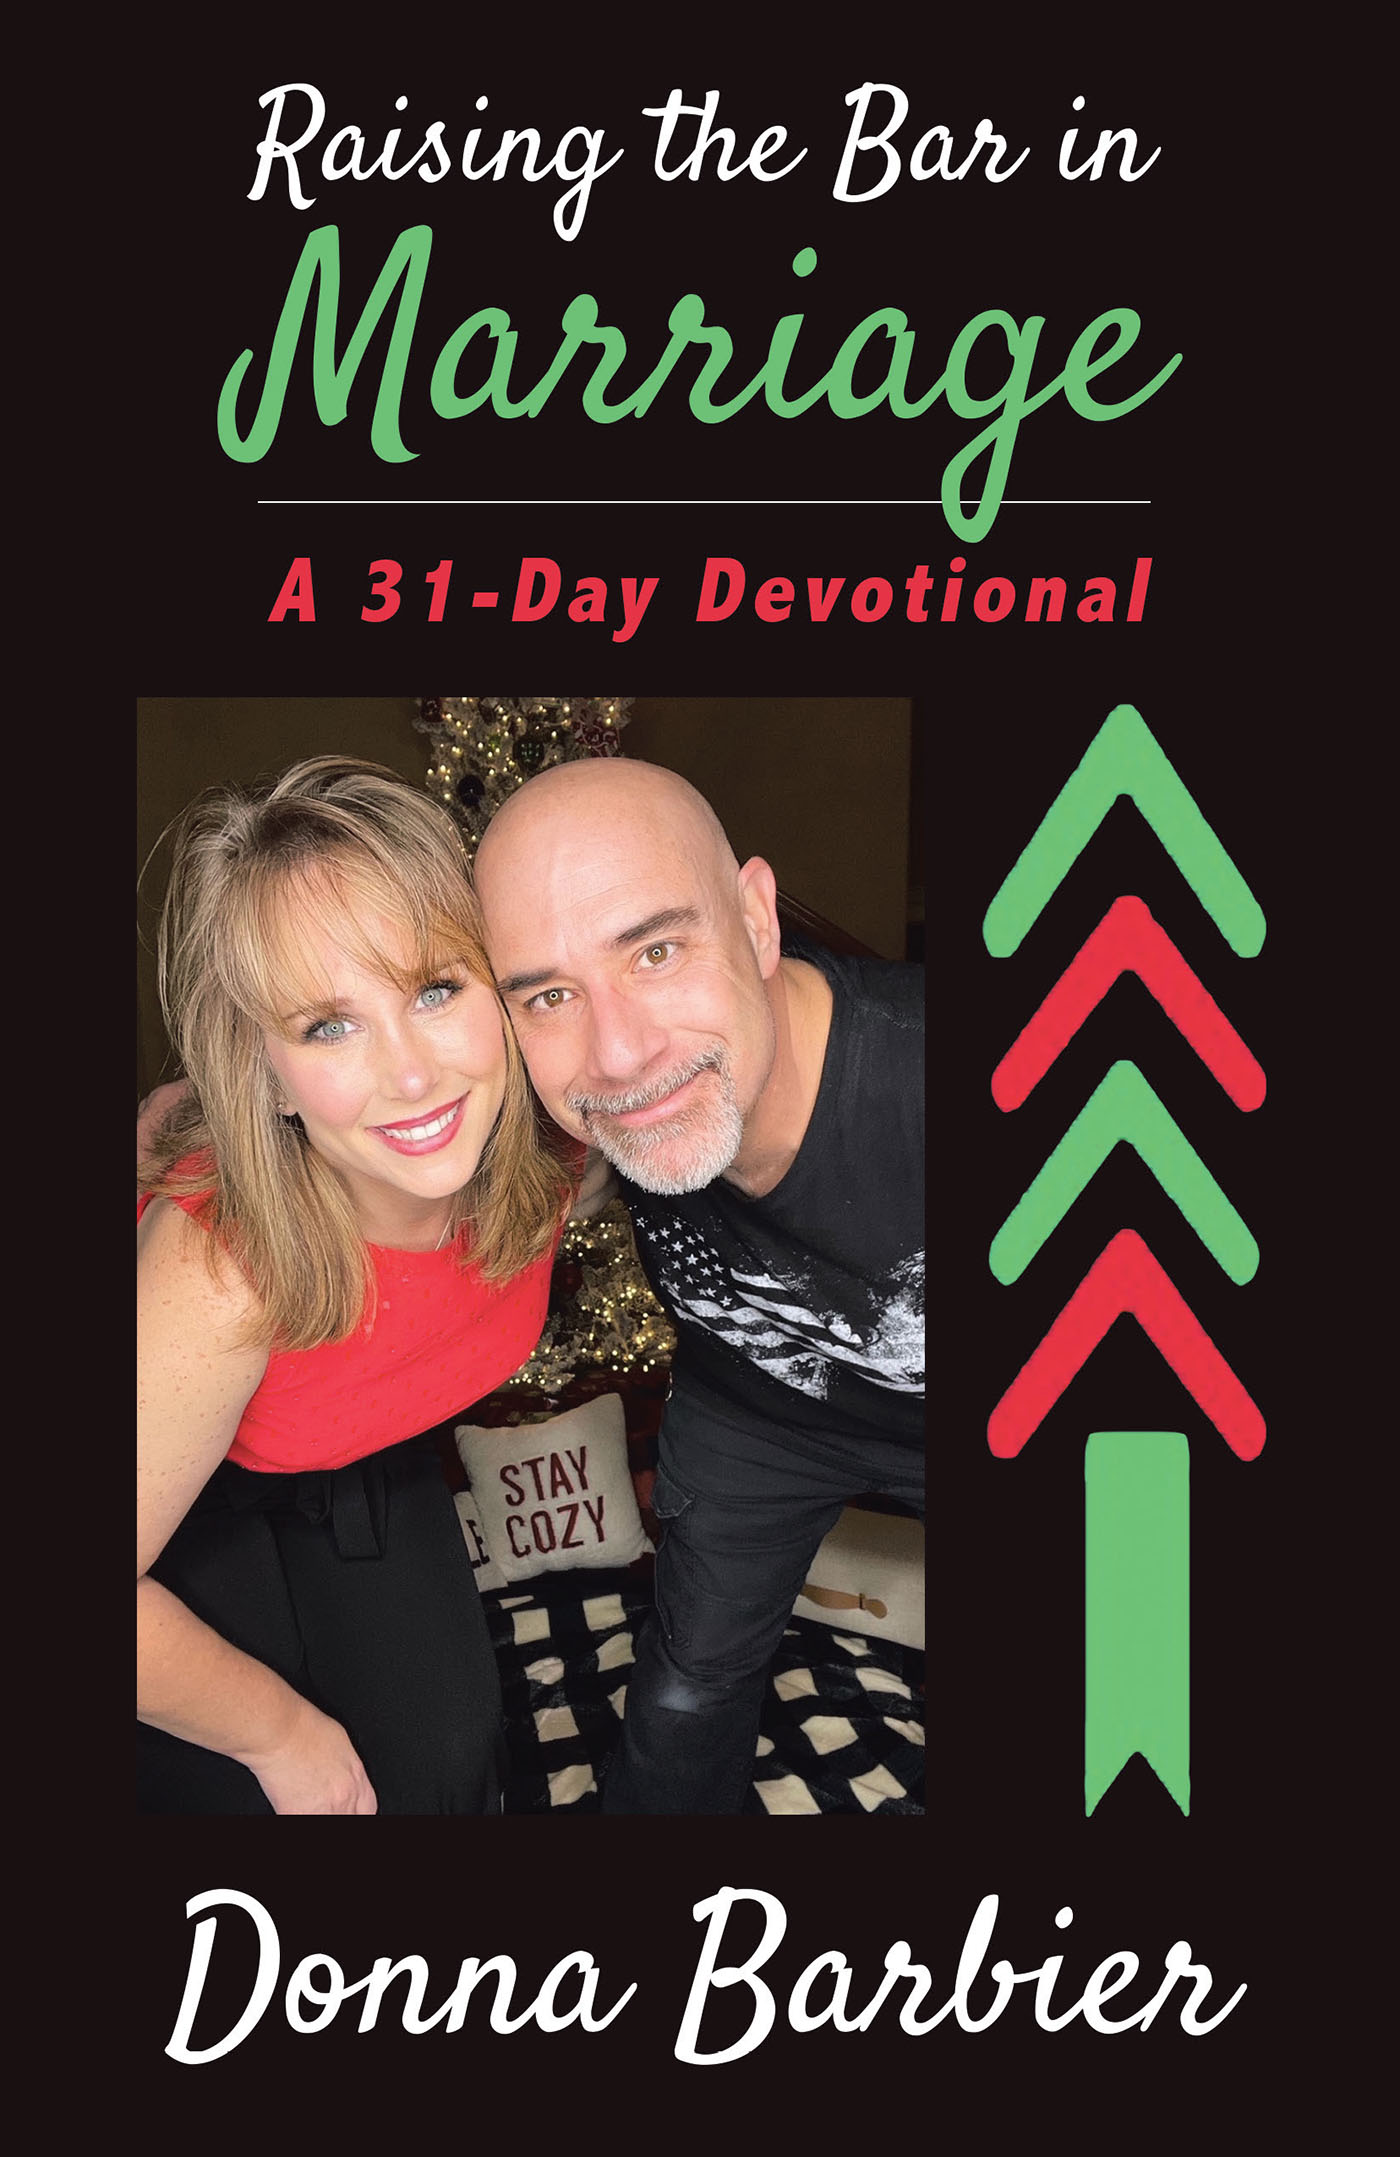 Donna Barbier’s Newly Released "Raising the Bar in Marriage: A 31-Day Devotional" is a Valuable Resource for Those Seeking a Deeper Awareness of the Marital Connection